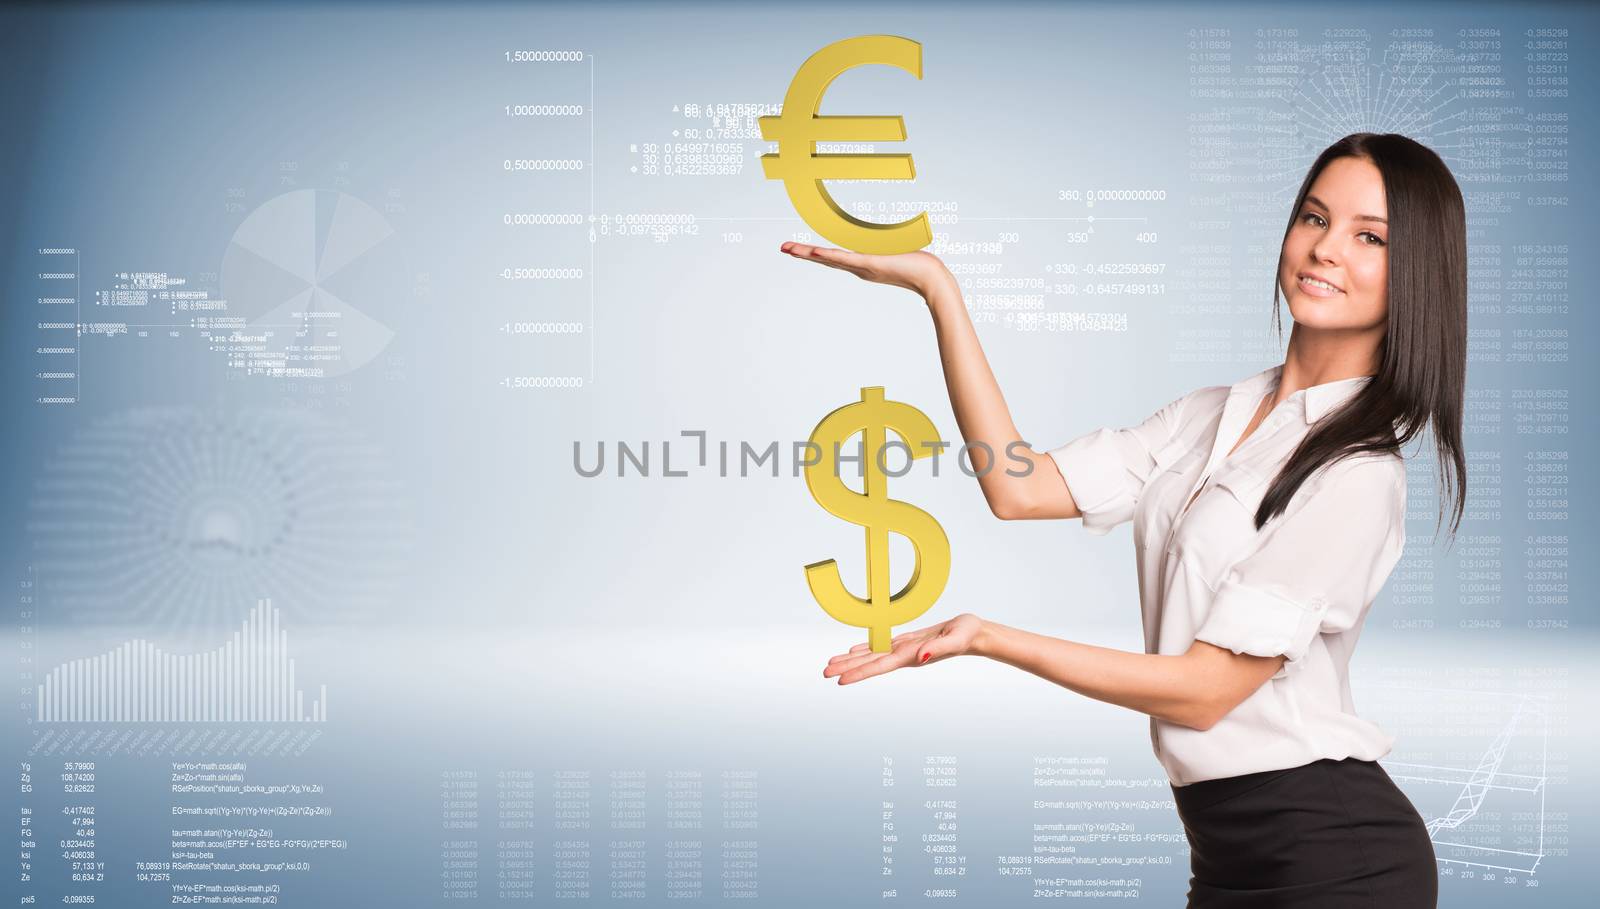 Smiling businesswoman in white shirt and black skirt holding dollar and euro signs. Graphs and texts as backdrop